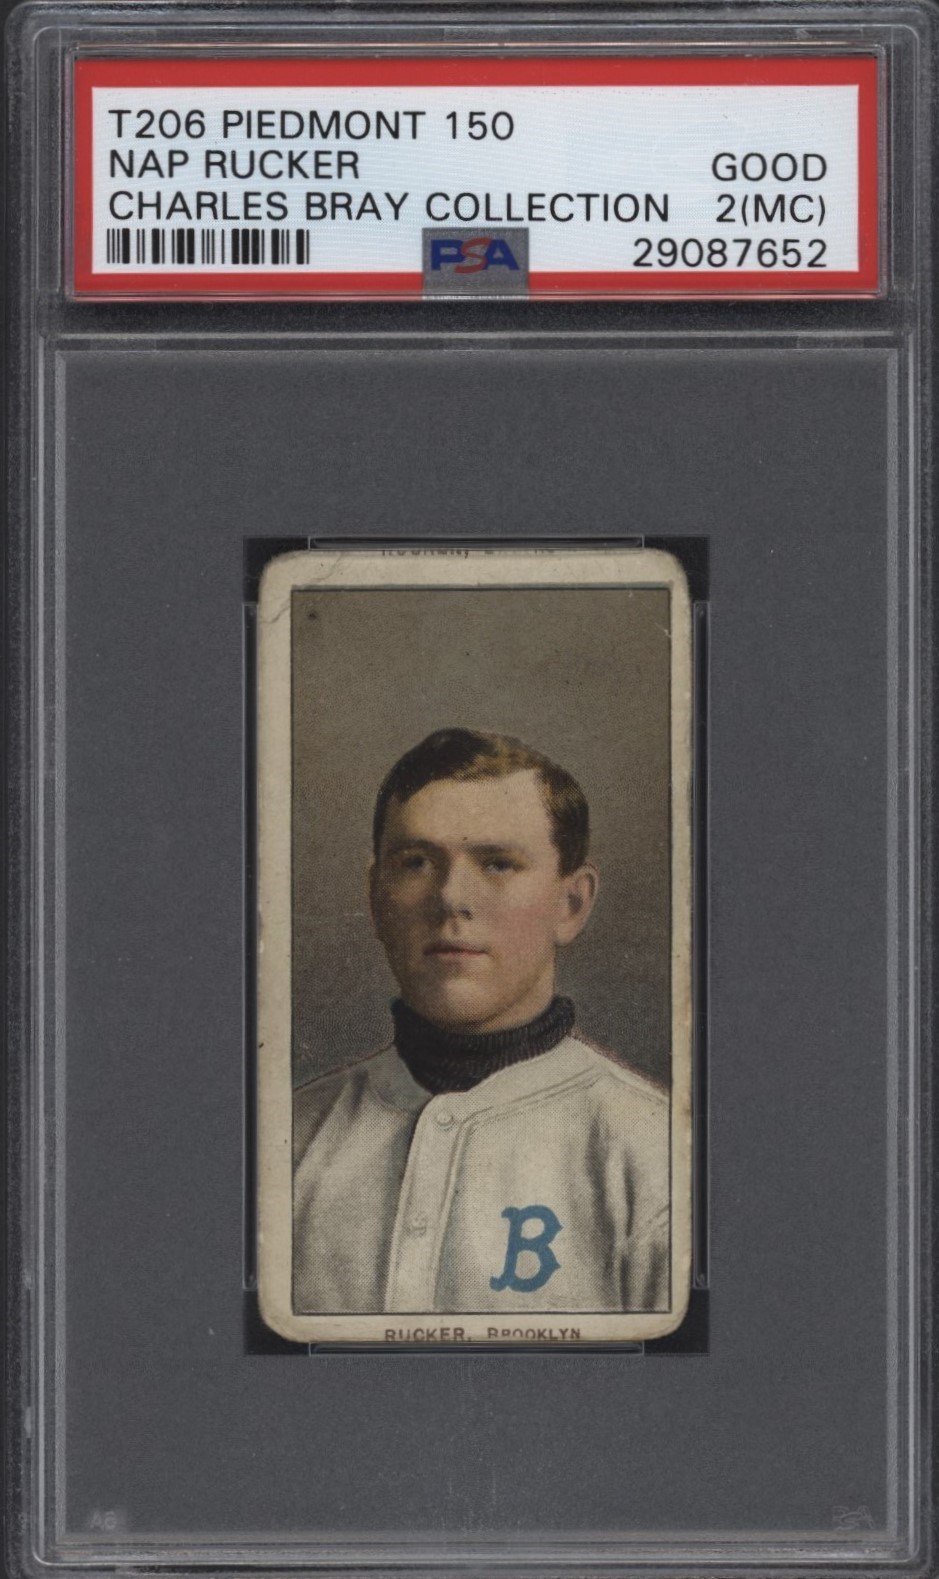 T206 Piedmont 150 Nap Rucker PSA 2 From the Charles Bray Collection